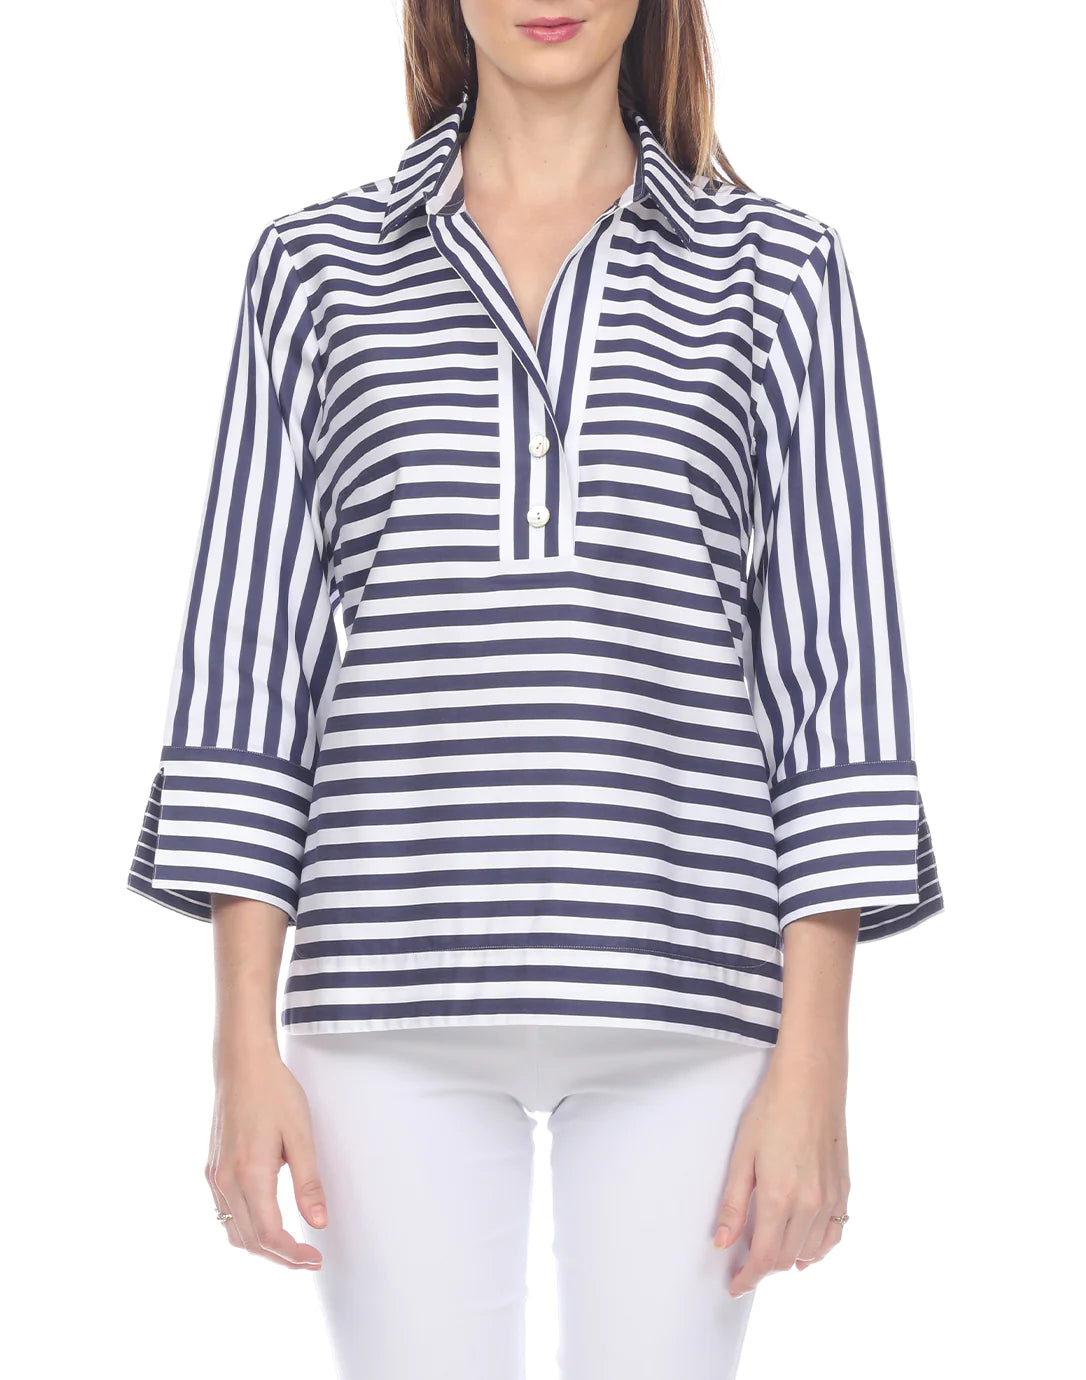 3/4 Sleeve Aileen Stripe with Gingham Cuff Top - Navy/White